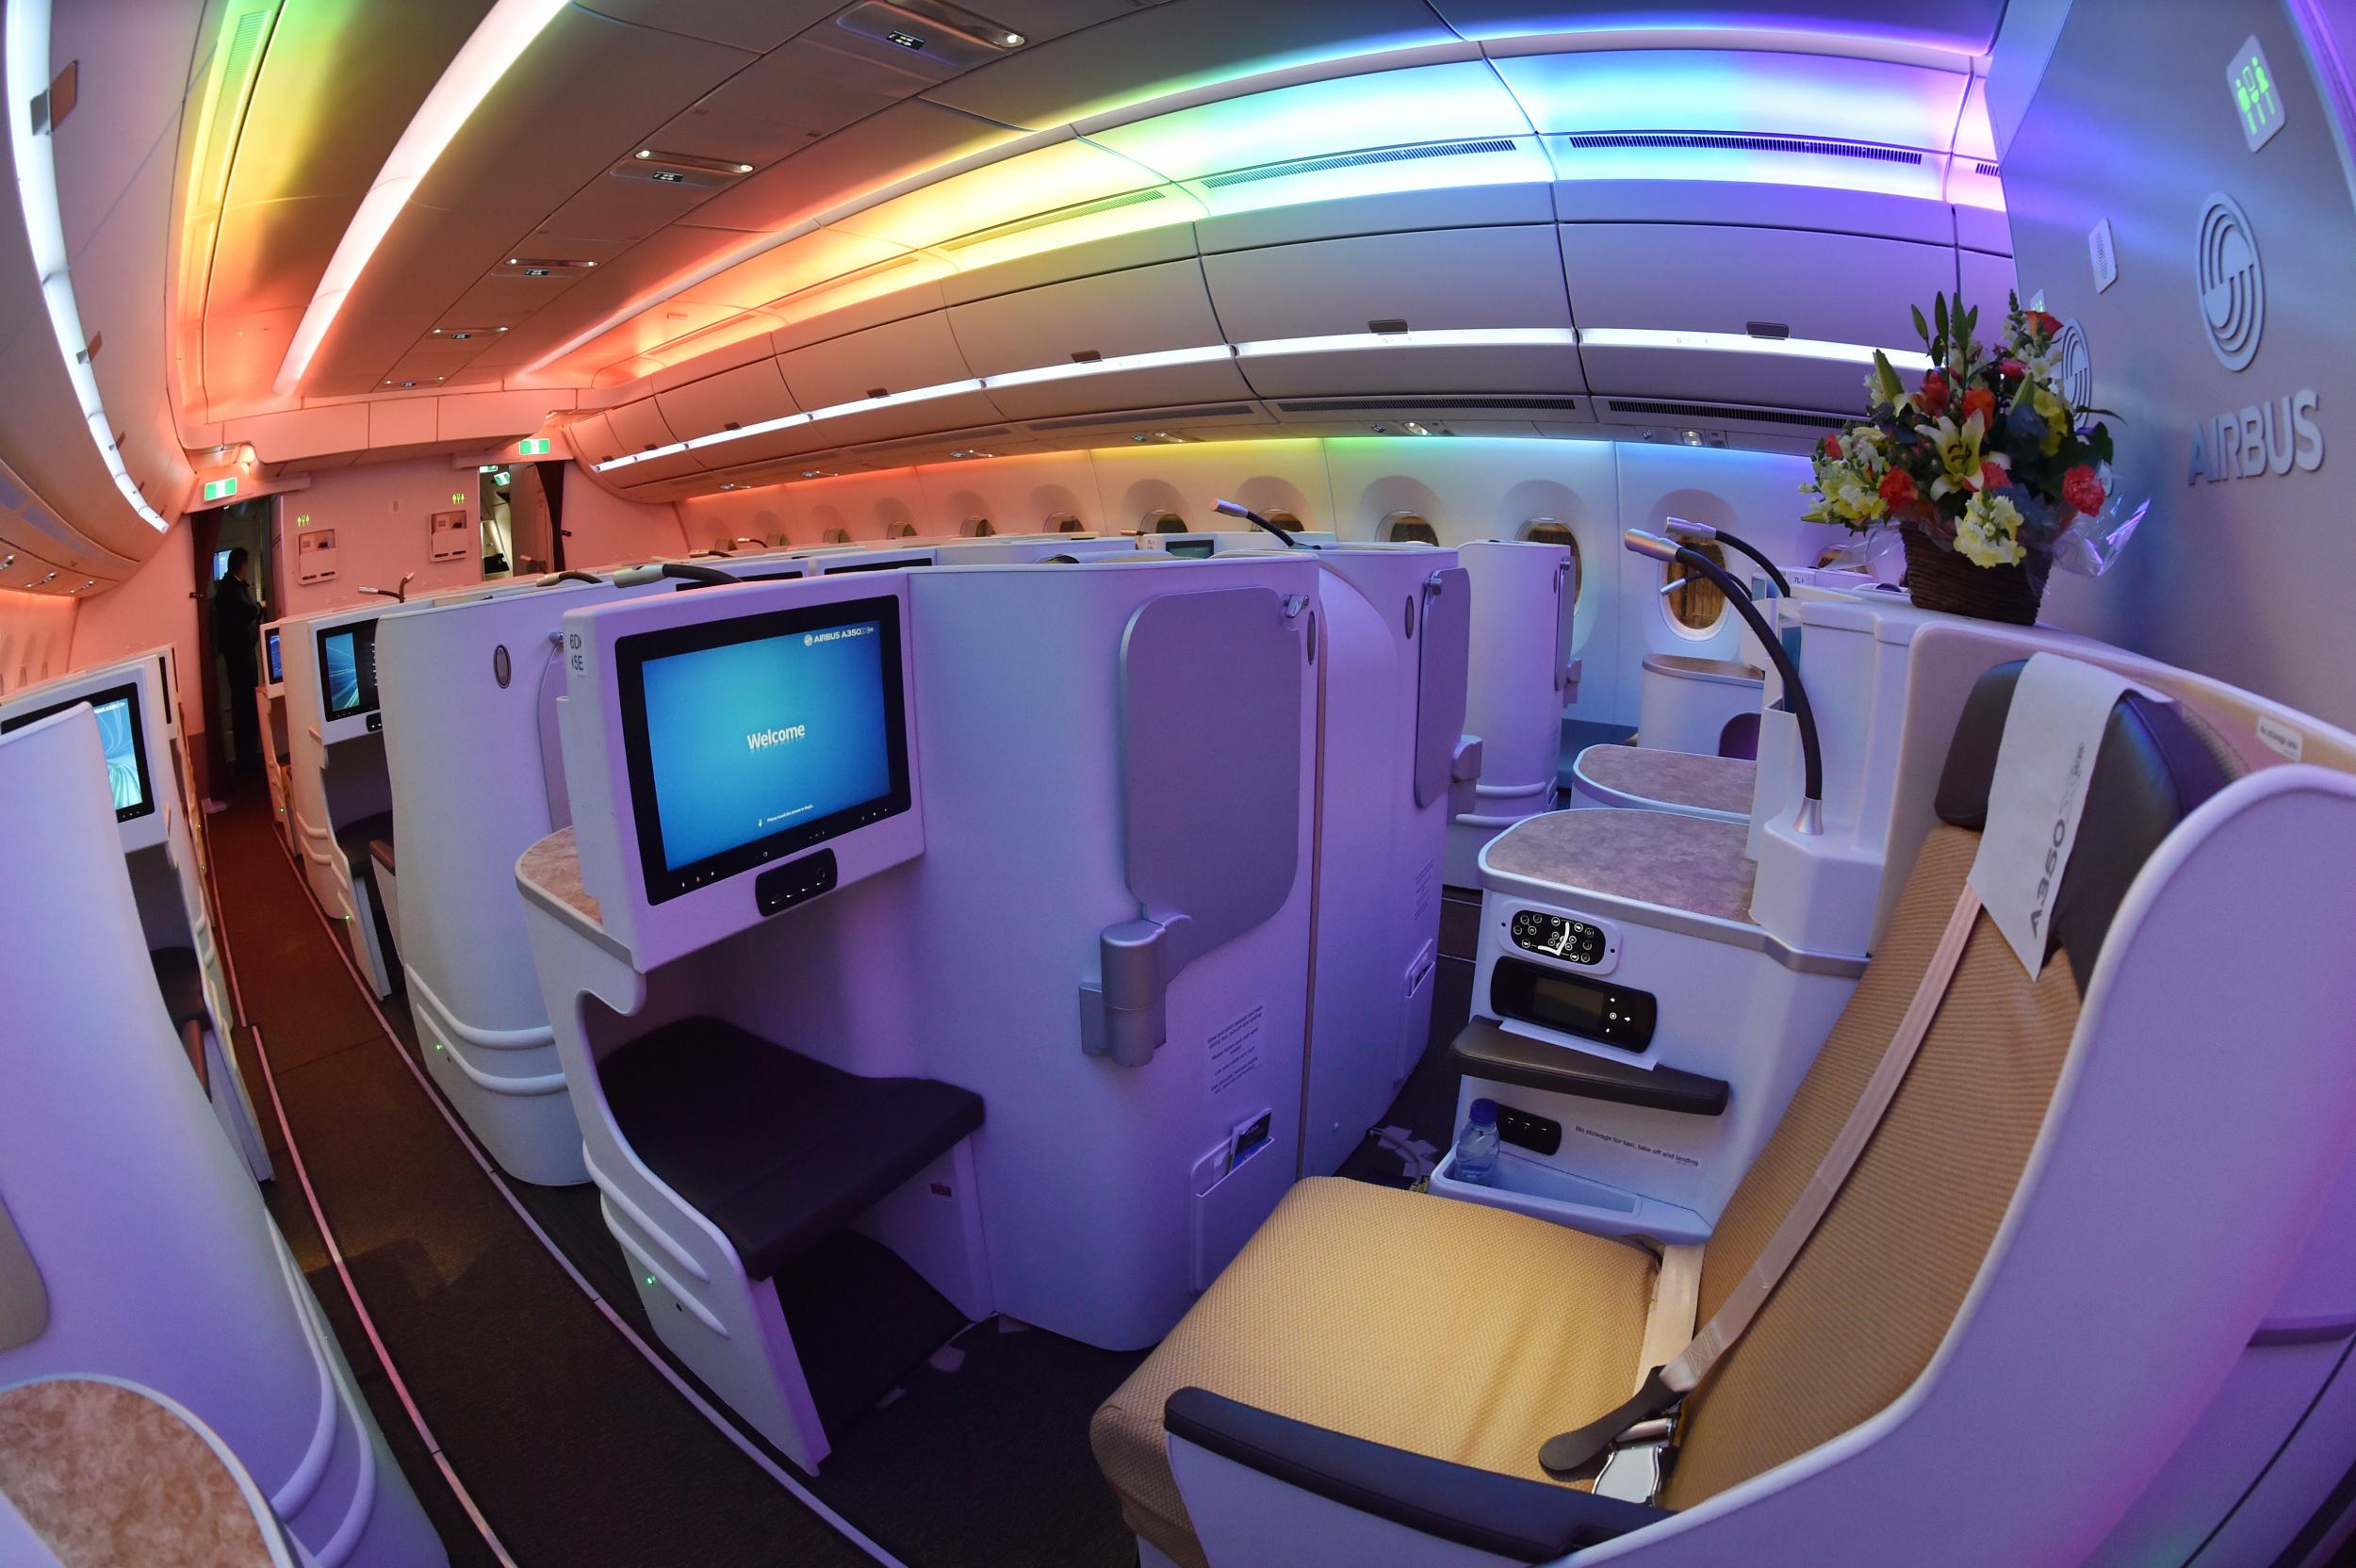 A Japan Airlines business class cabin